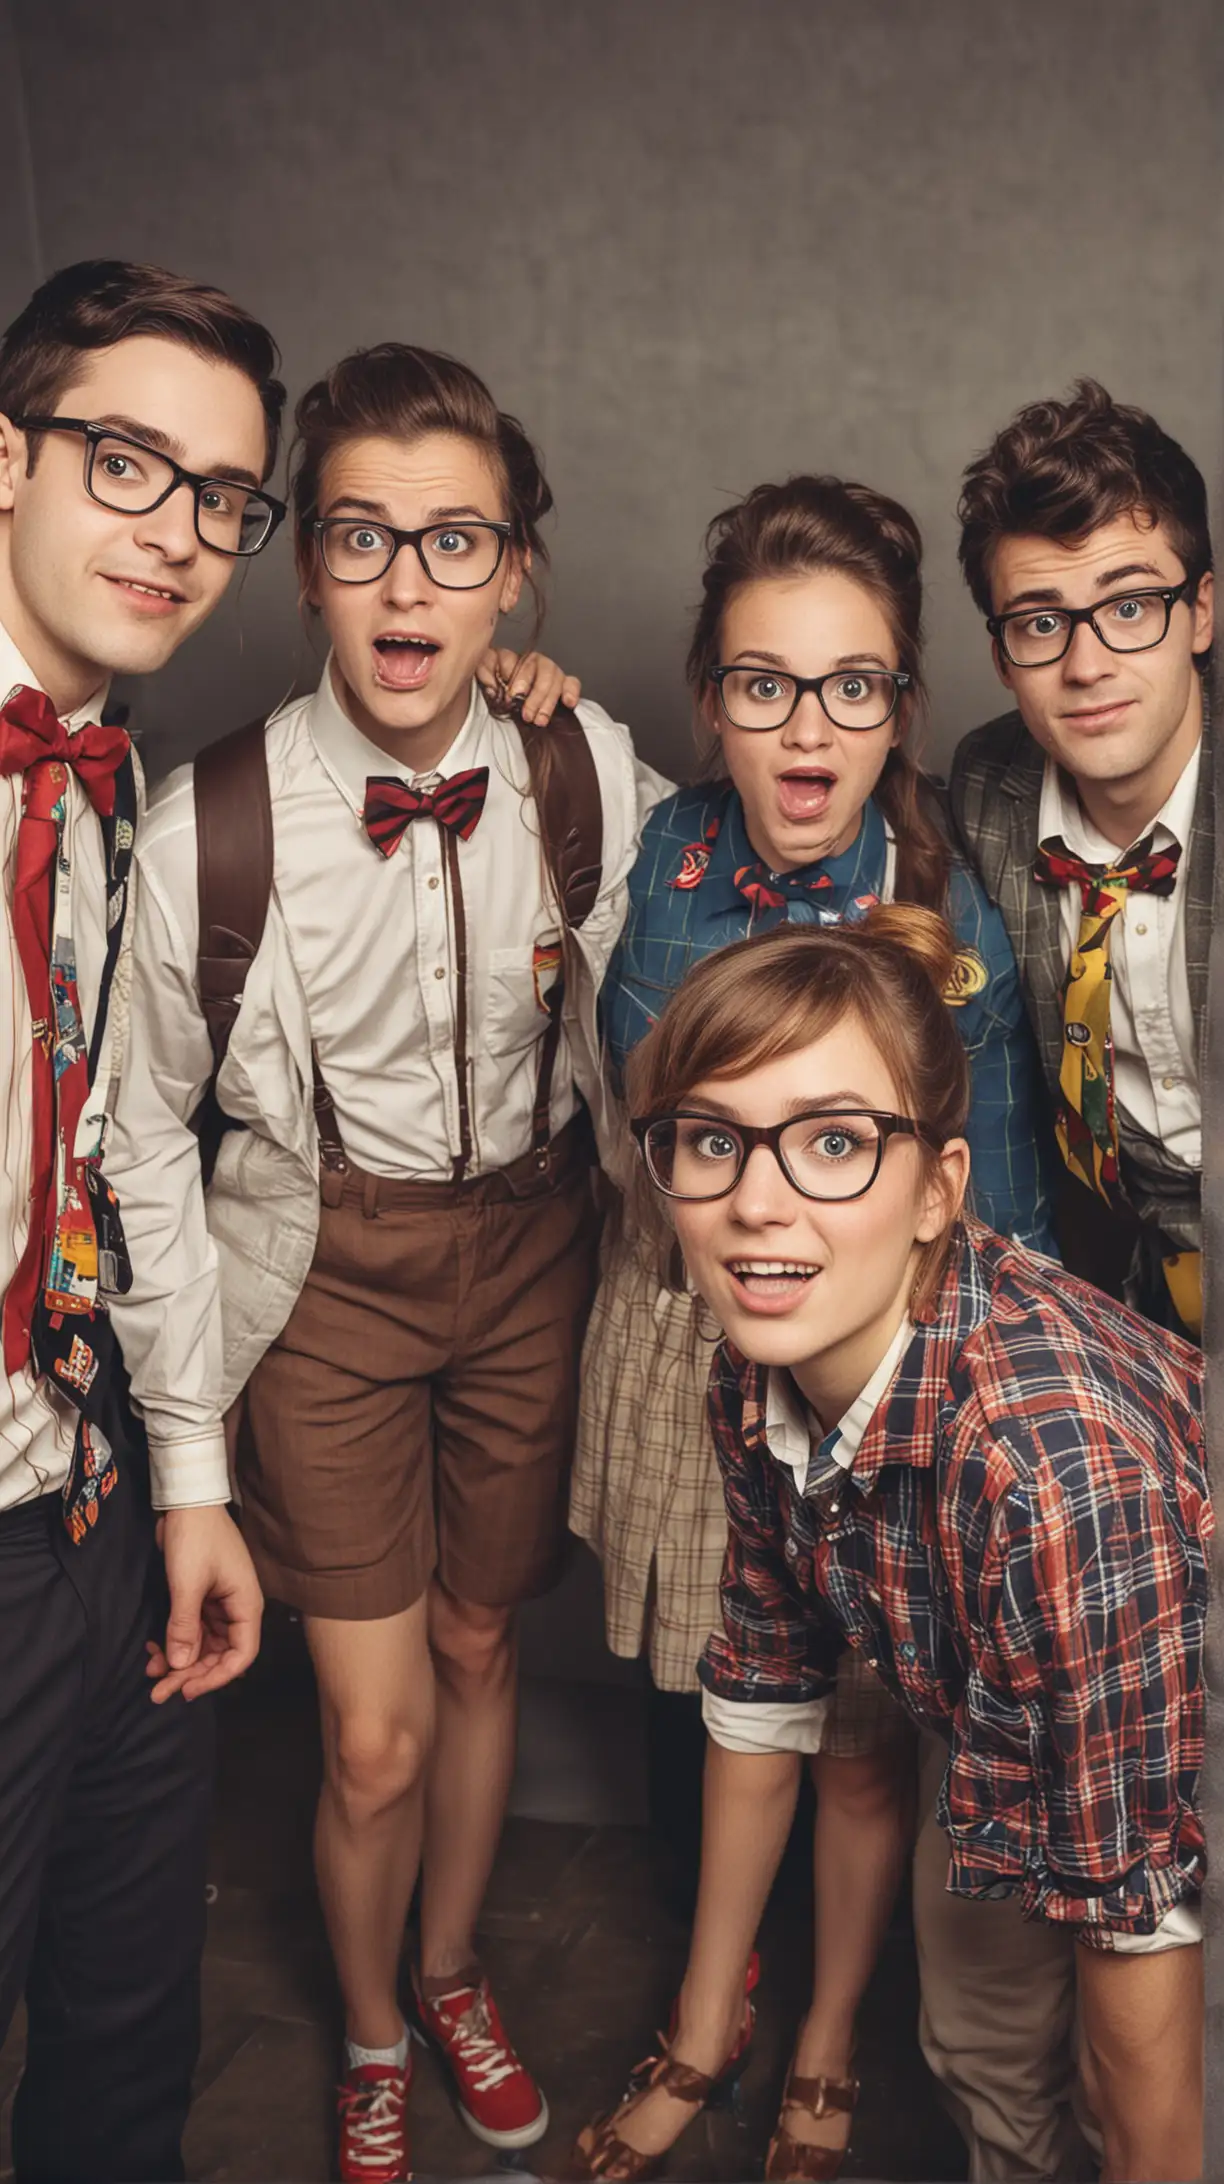 Nerdy Partygoers in Costume Celebrating Together